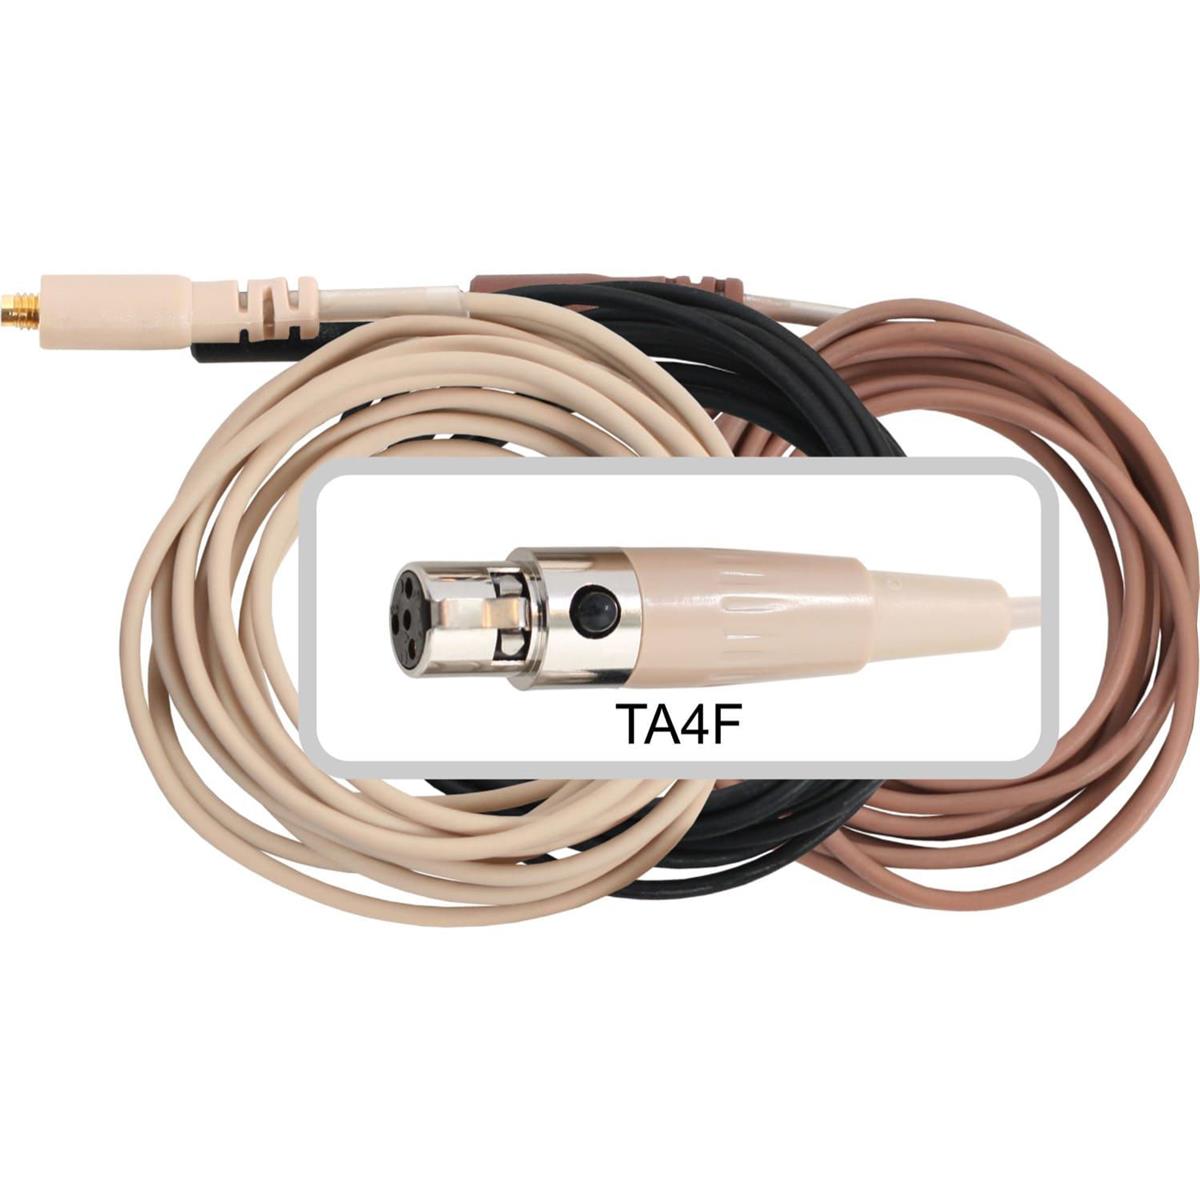 Image of Galaxy Audio CBLSHU ESS/HSD/HSE/HSH Headset Cable with TA4F Connector